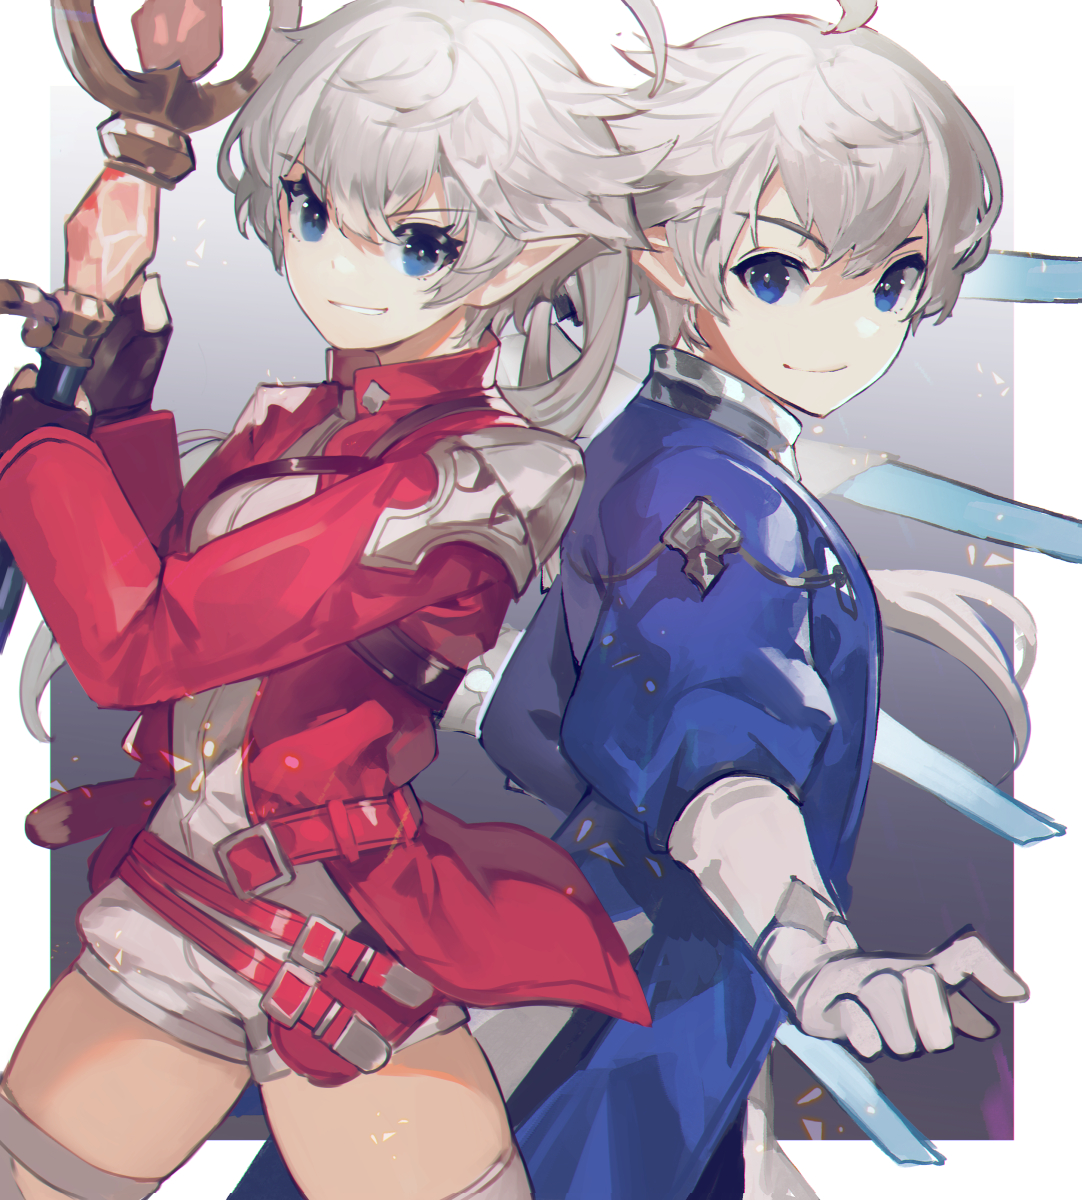 「congratz to the twins that finally appea」|Akizoneのイラスト